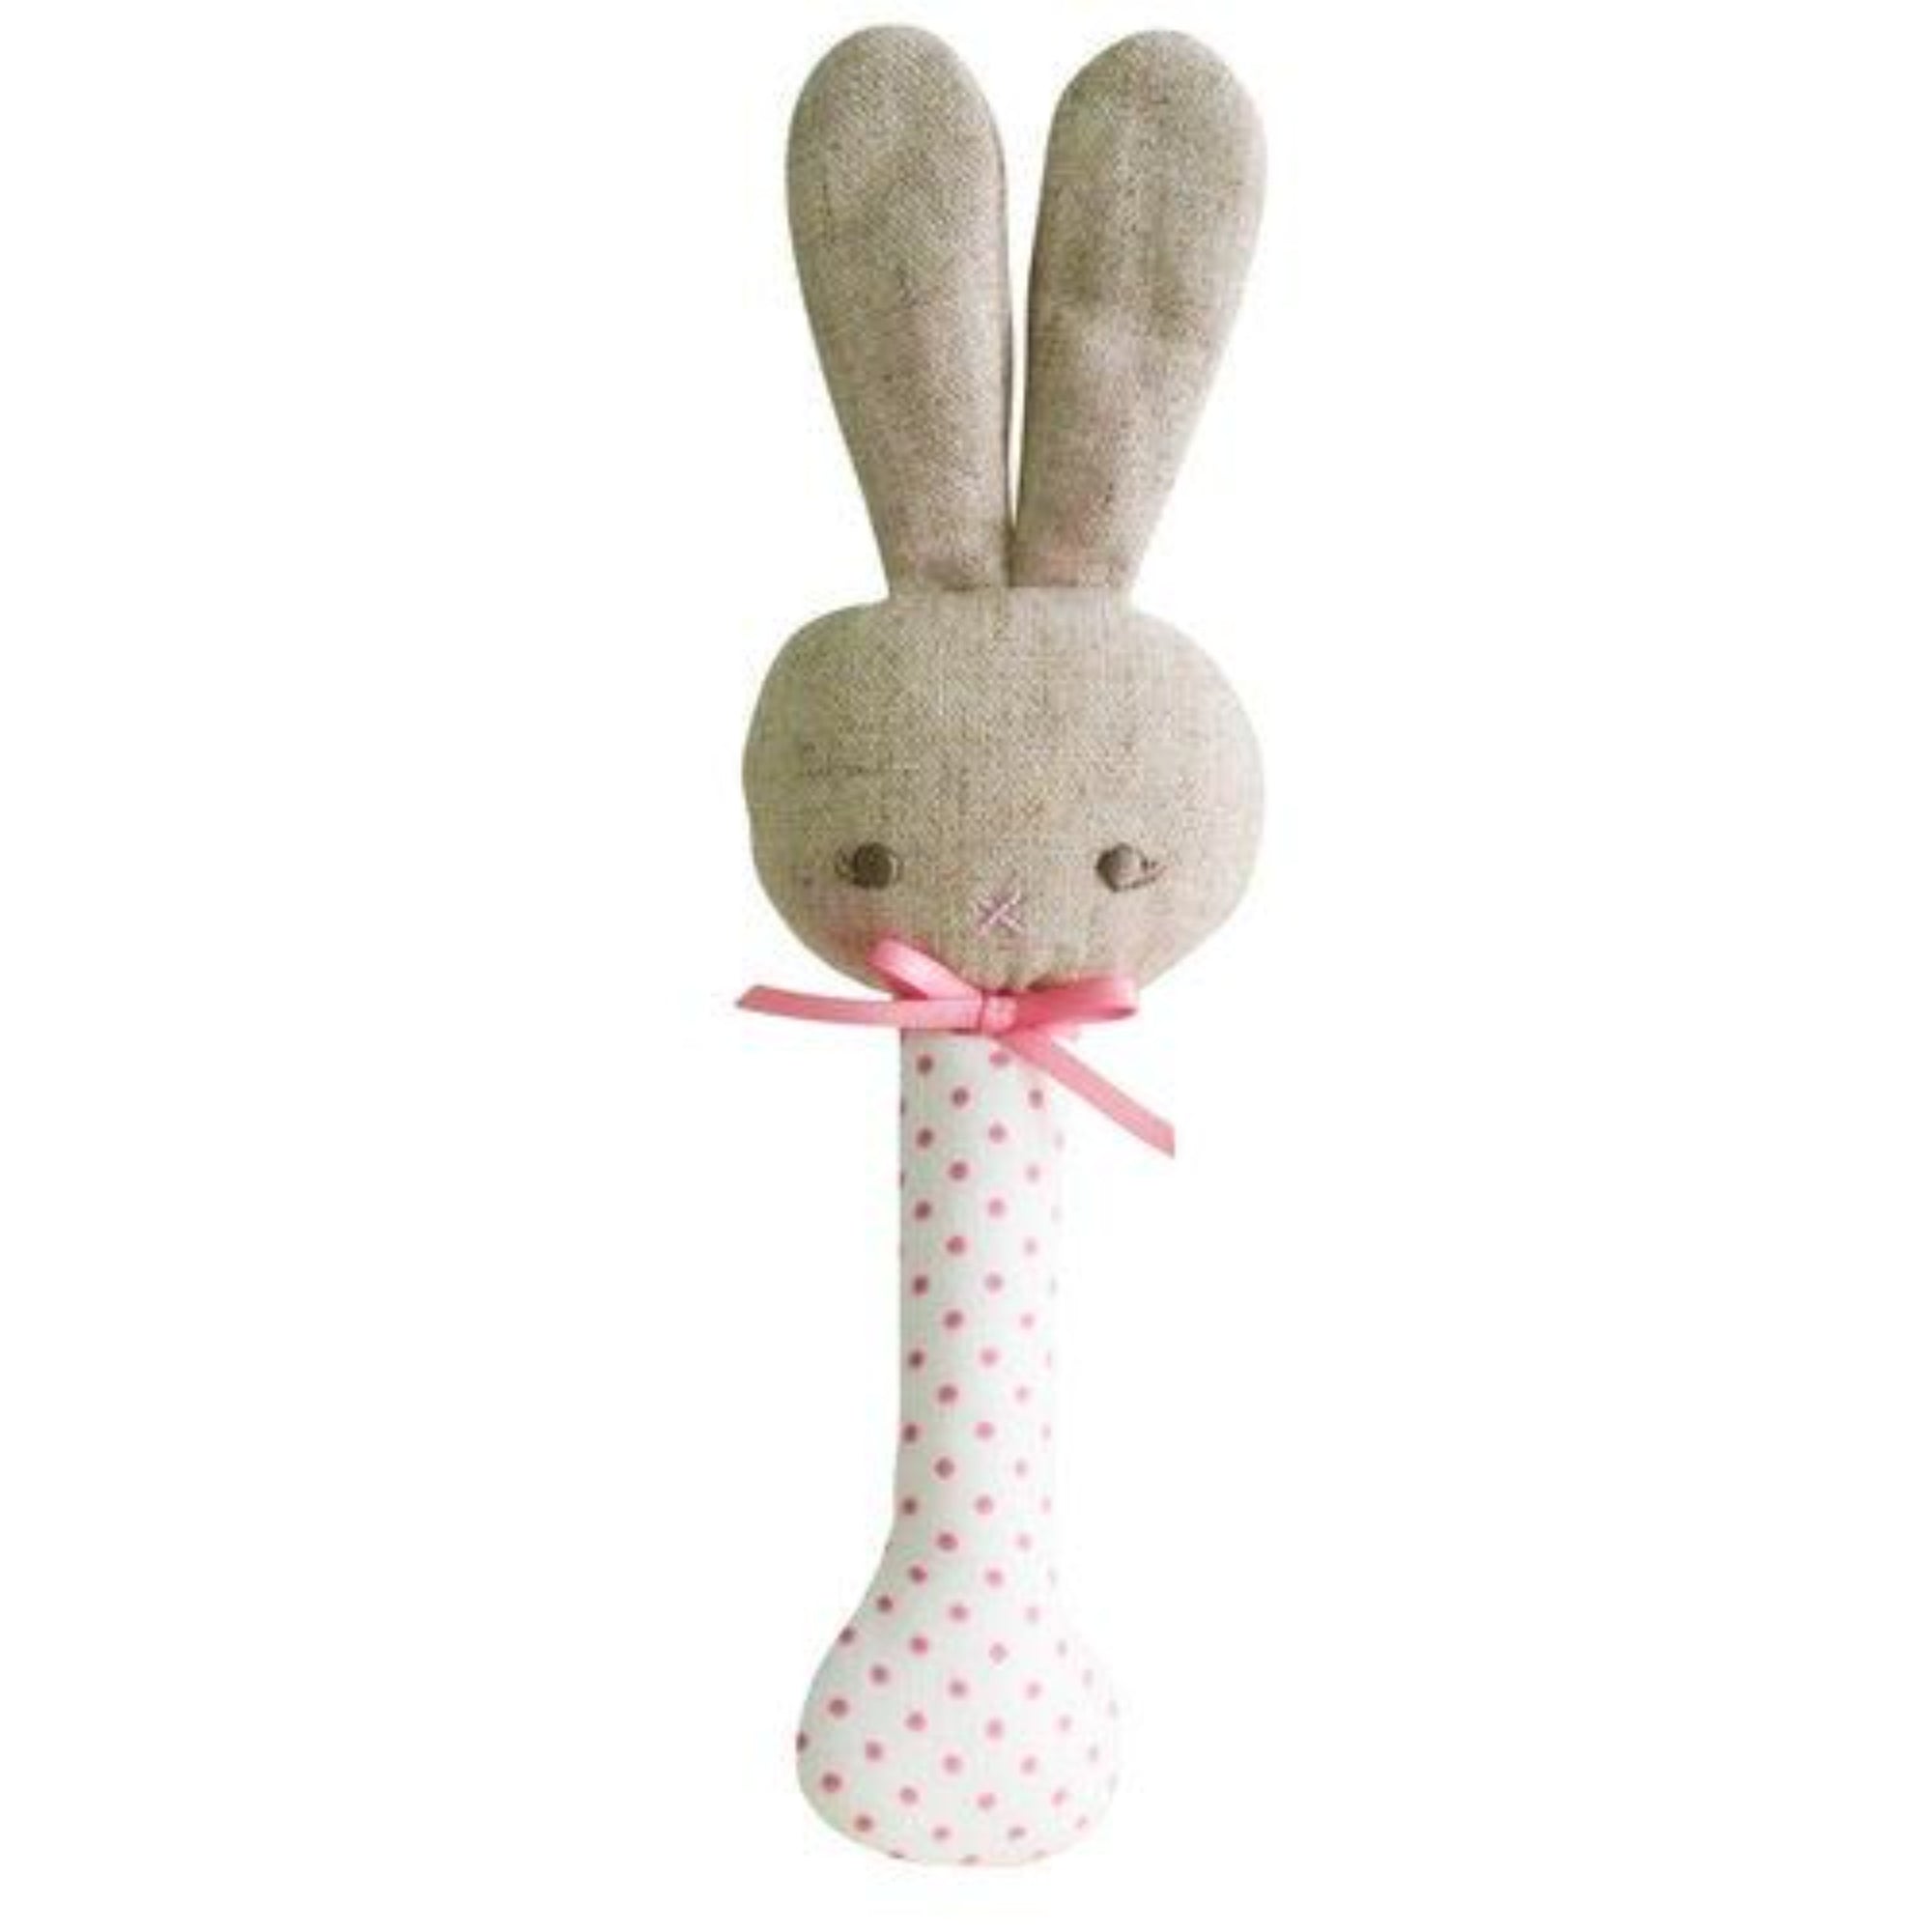 Alimrose Designs Bunny Stick Rattle Spot Pink on Ivory - Toys/Accessories - Alimrose